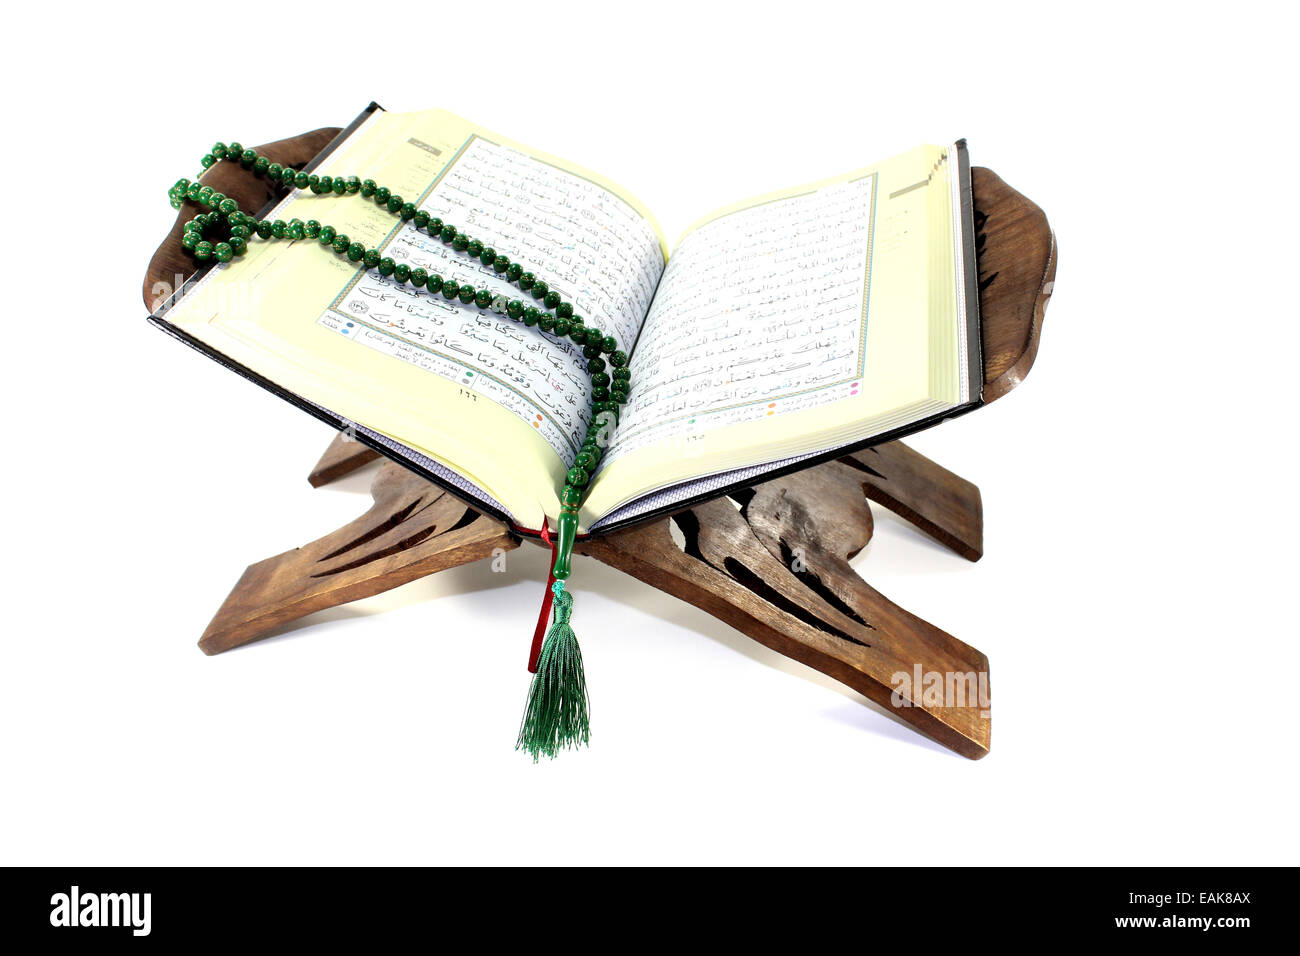 Misbruge Samler blade Terminologi stand with an opened Quran and rosary before light background Stock Photo -  Alamy